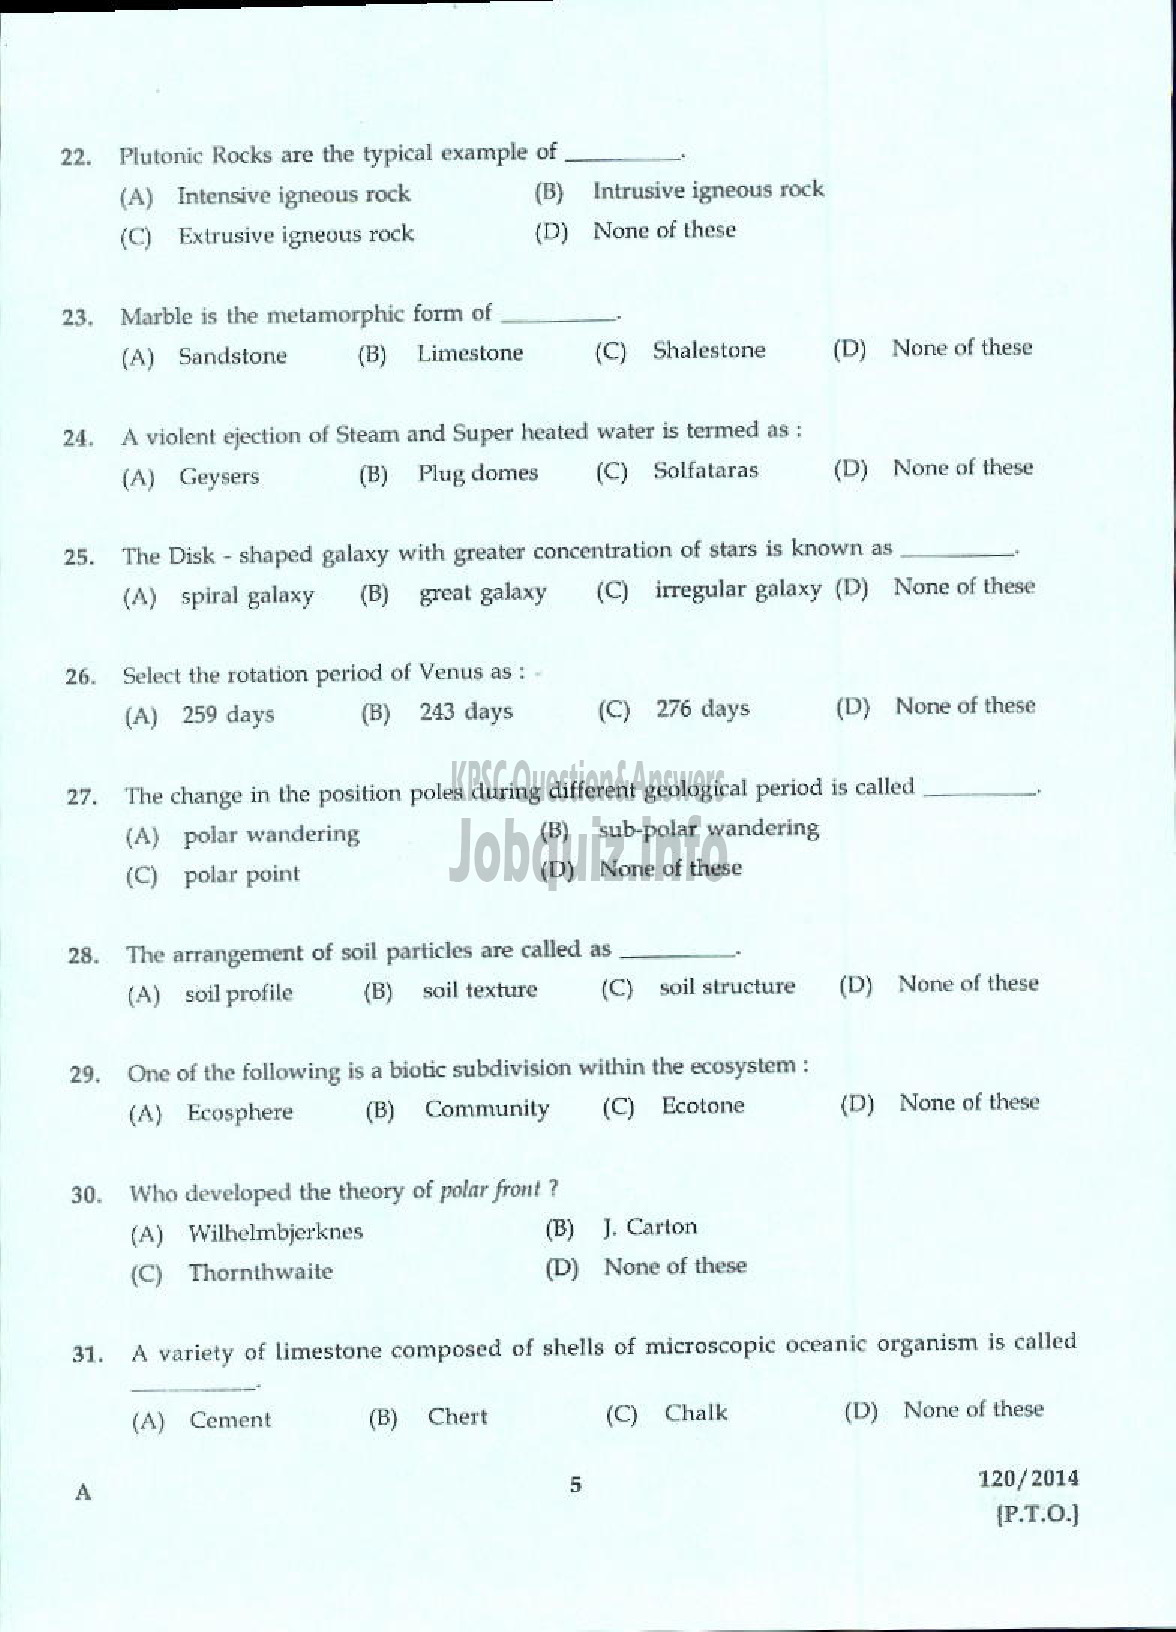 Kerala PSC Question Paper - LECTURER IN GEOGRAPHY KERALA COLLEGIATE EDUCATION-3